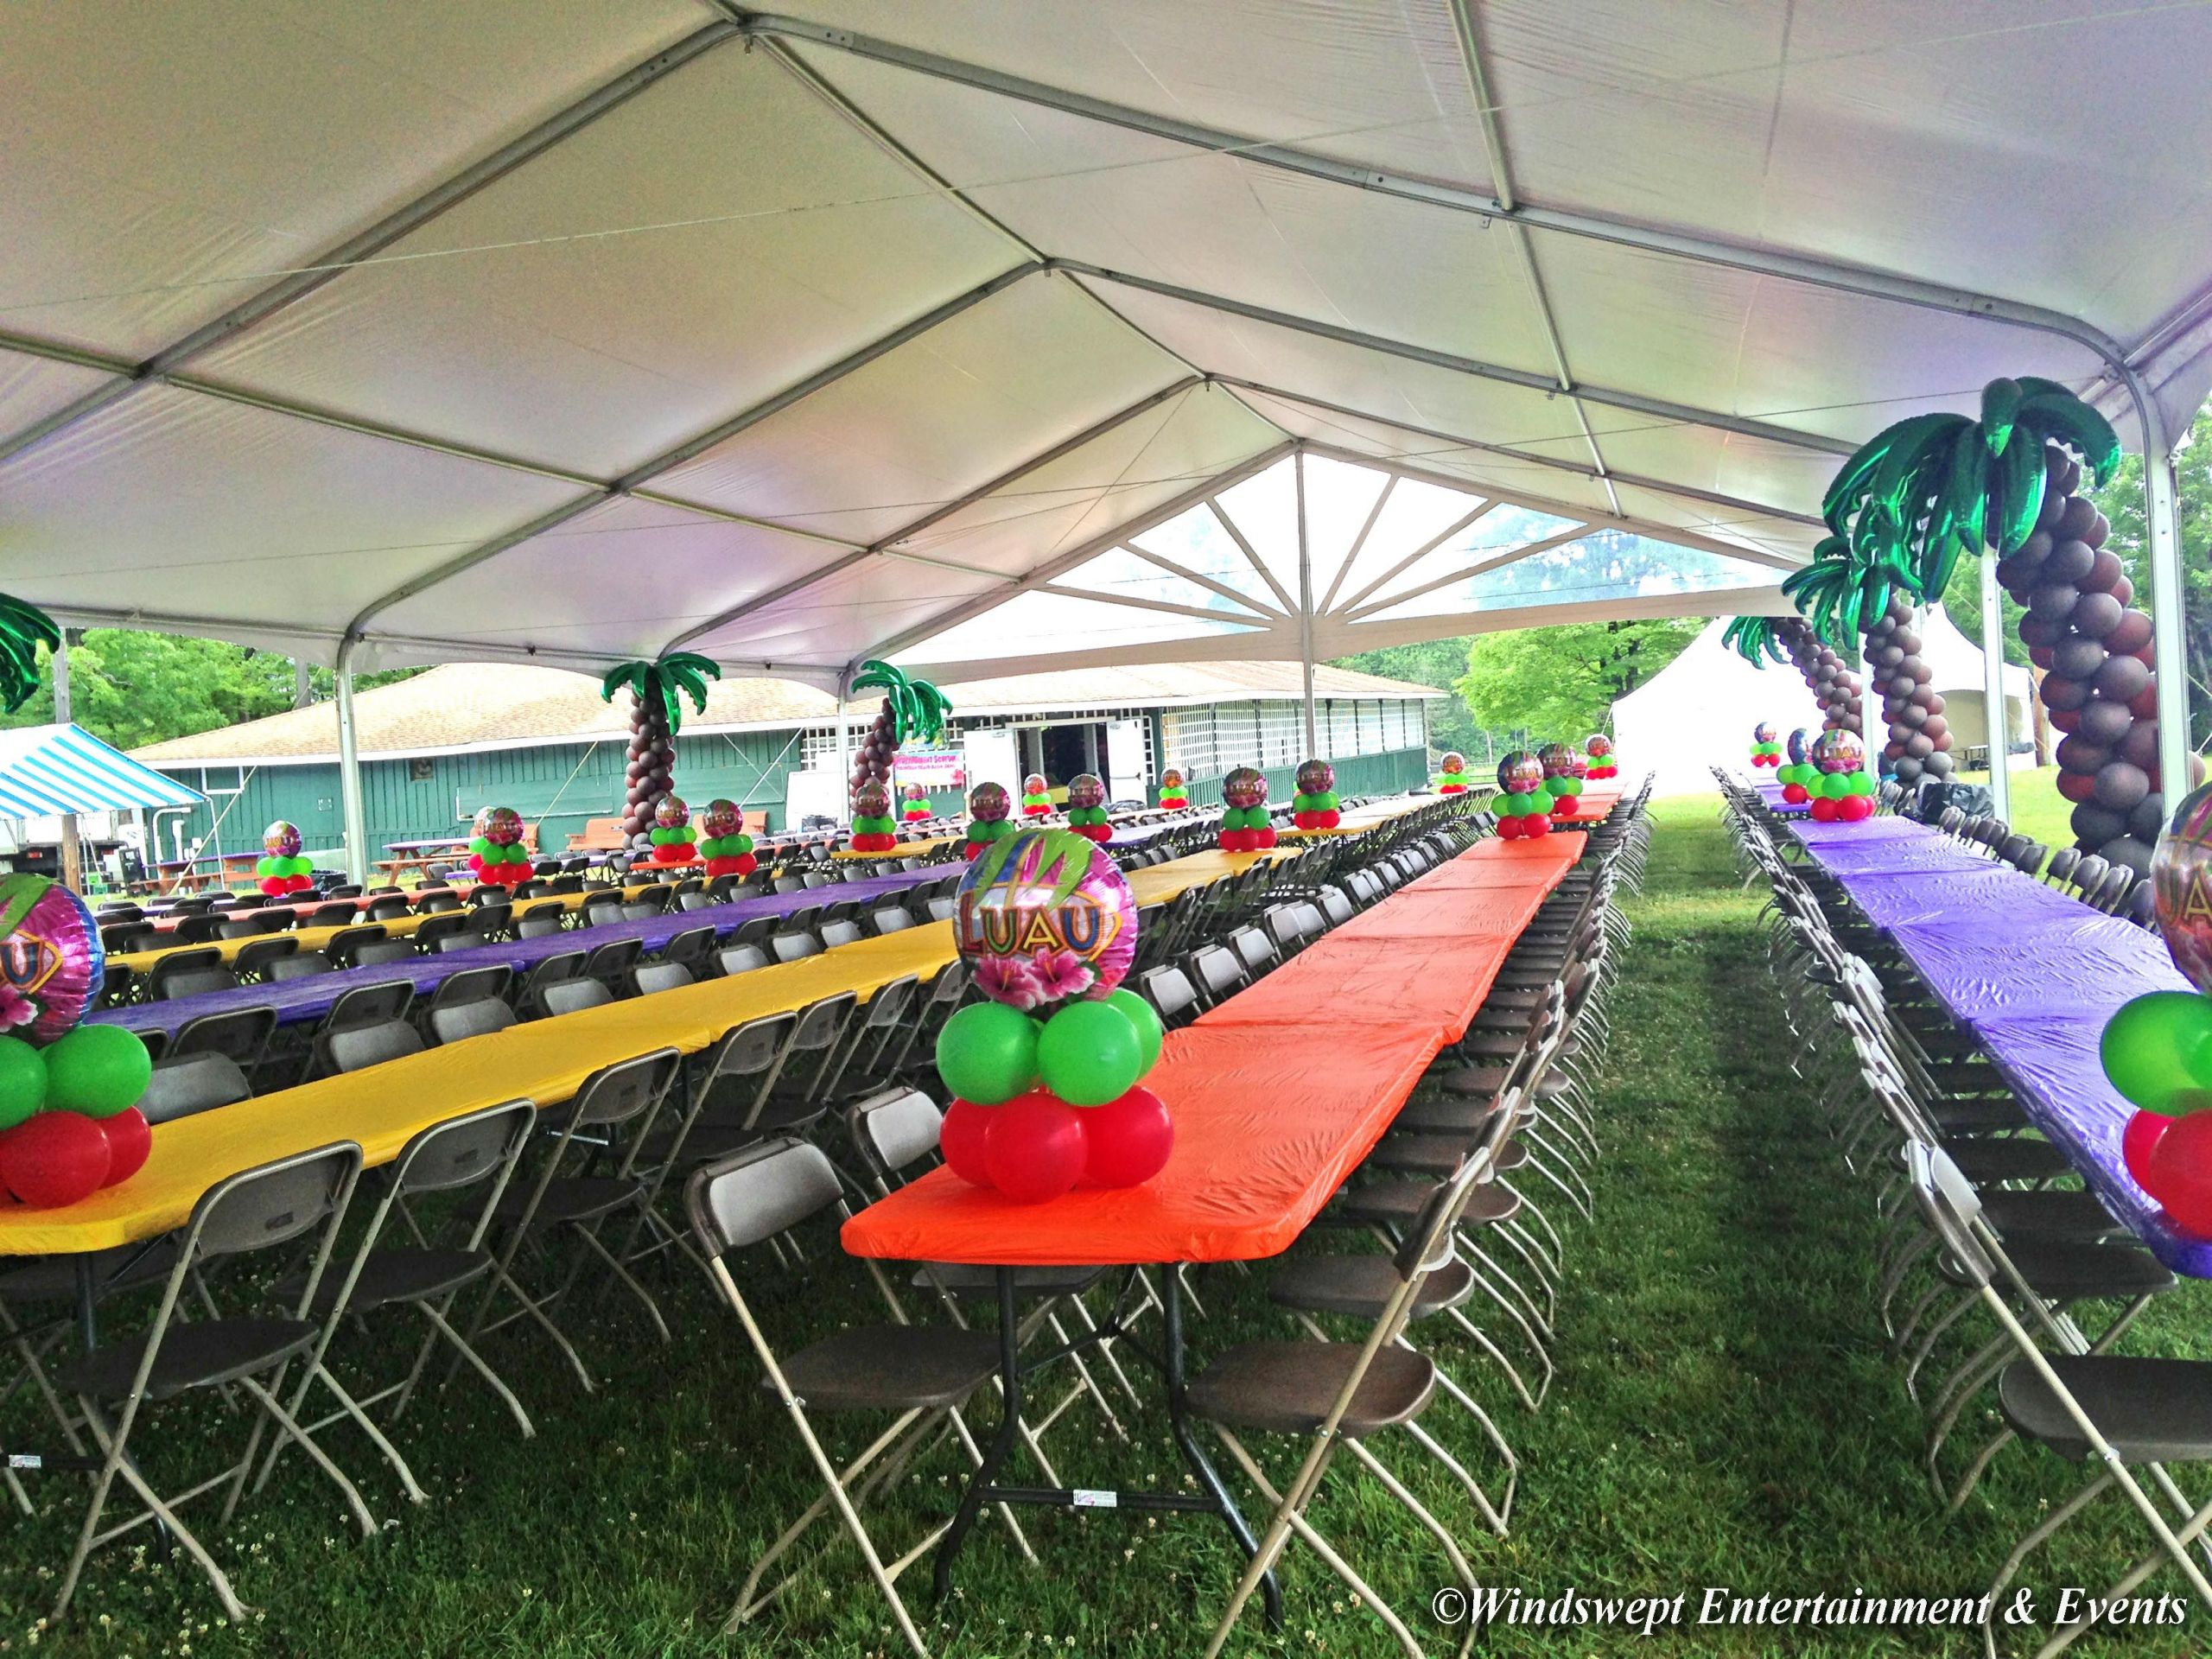 Corporate Summer Party Ideas
 This luau themed pany picnic was a huge hit in 2019